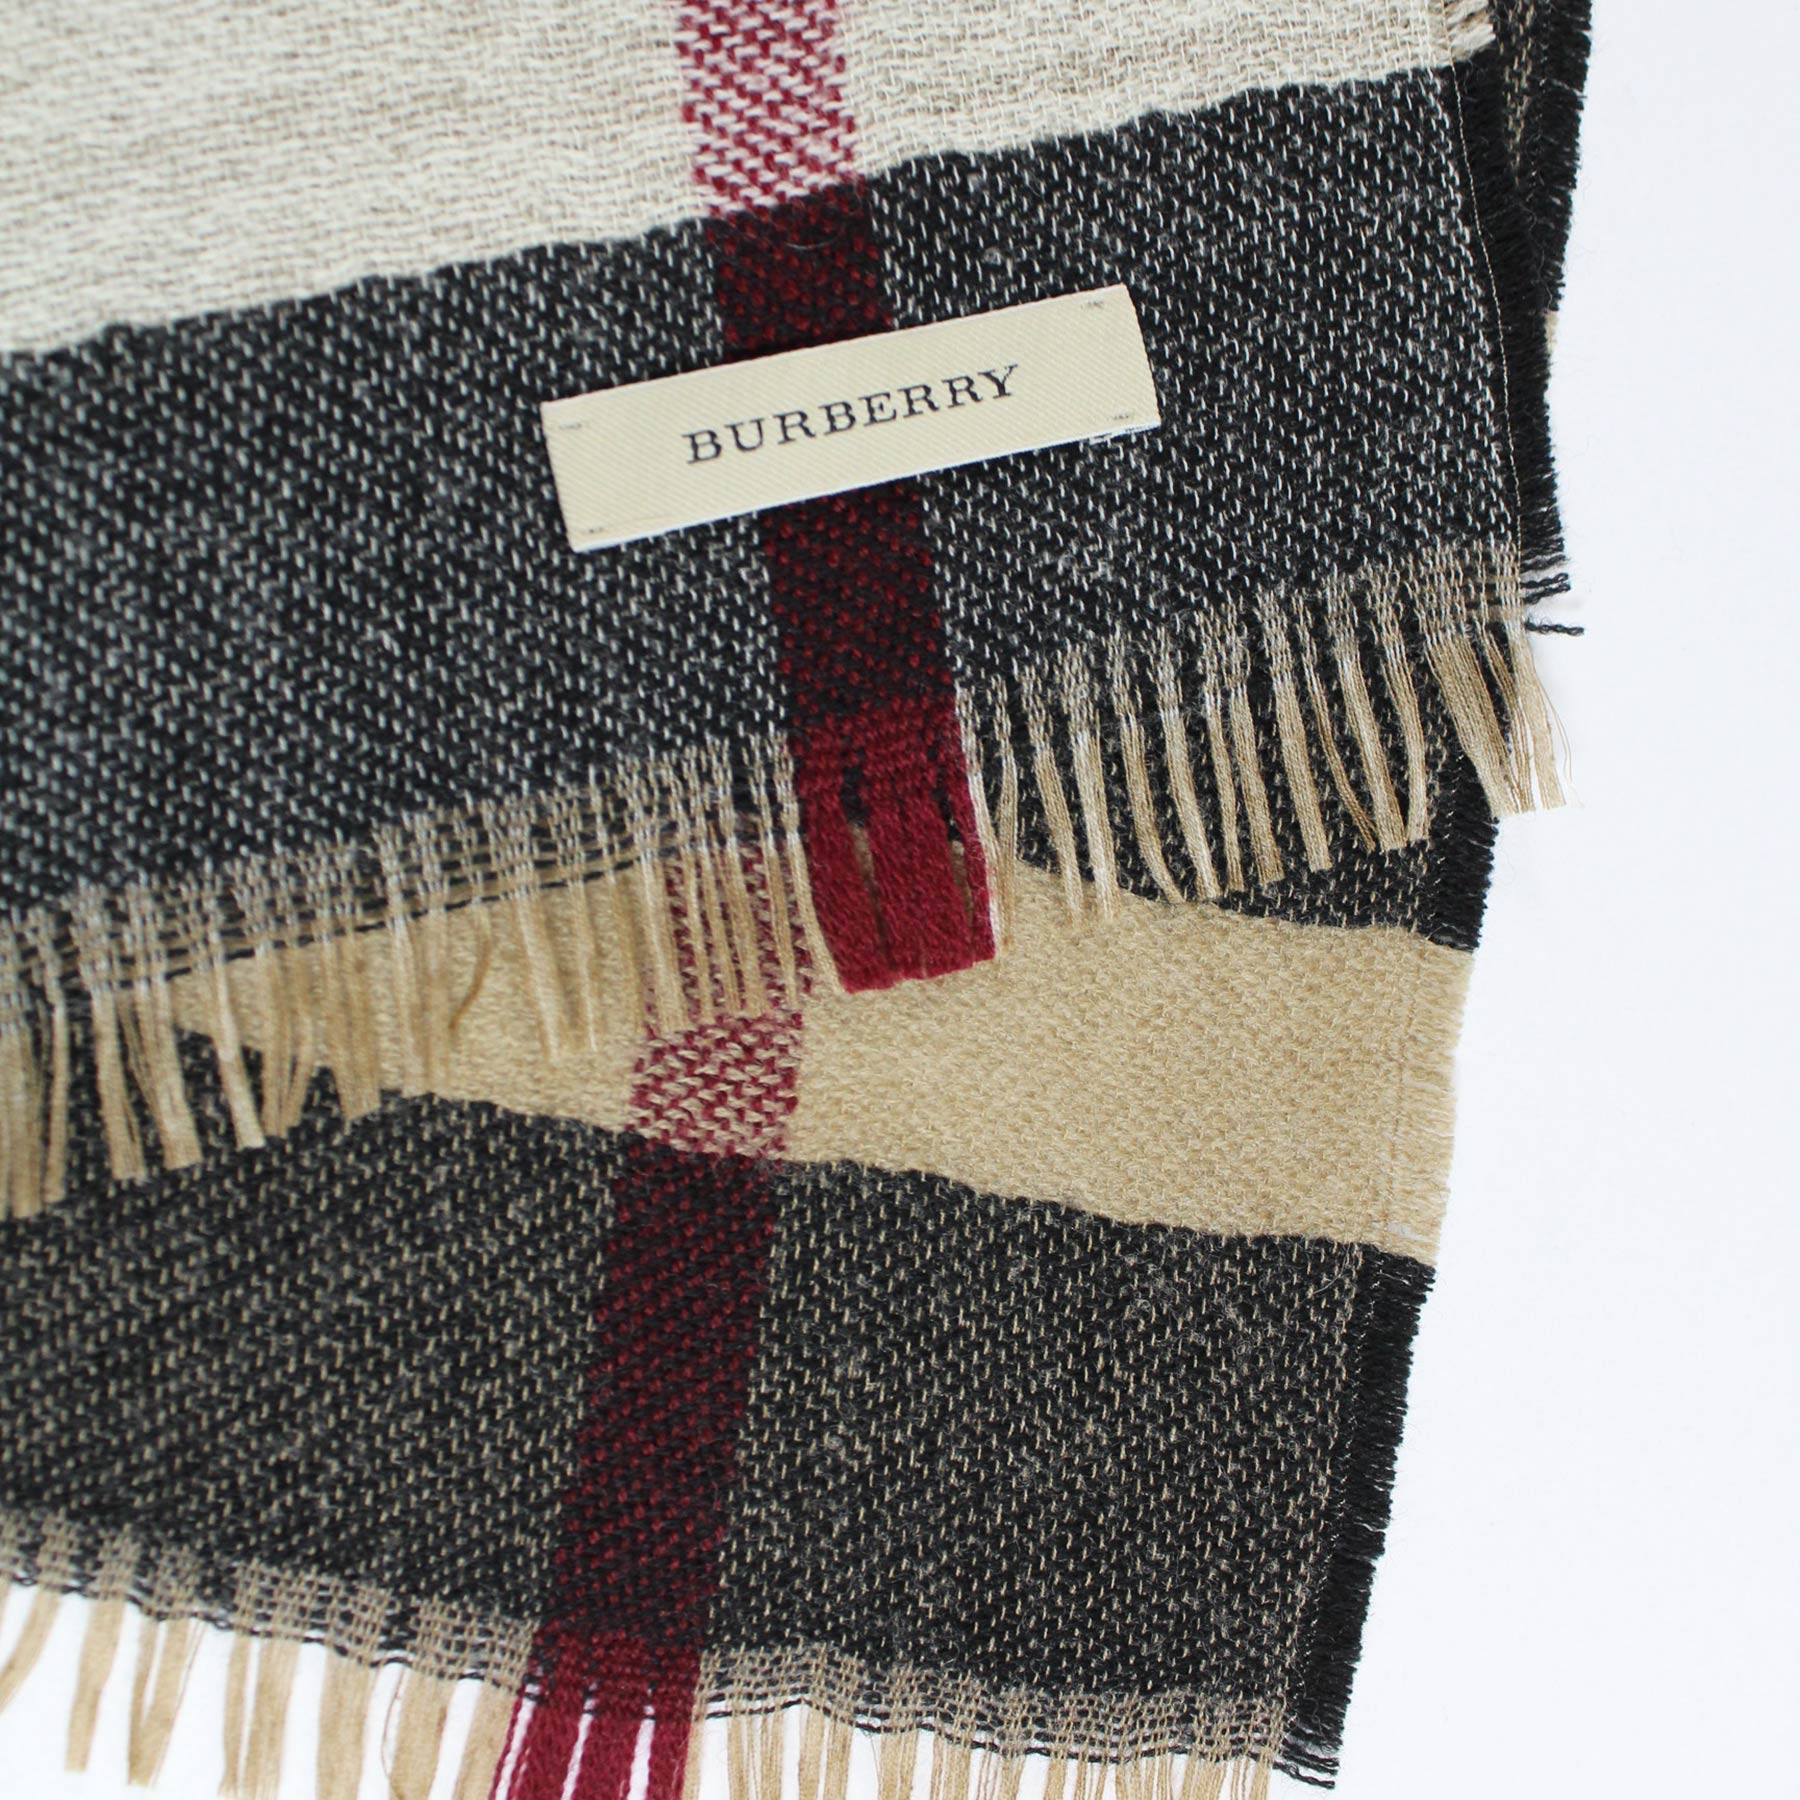 Forstyrre detektor bid Burberry Scarf Signature Check - Wool Shawl Made In Italy SALE - Como Milano